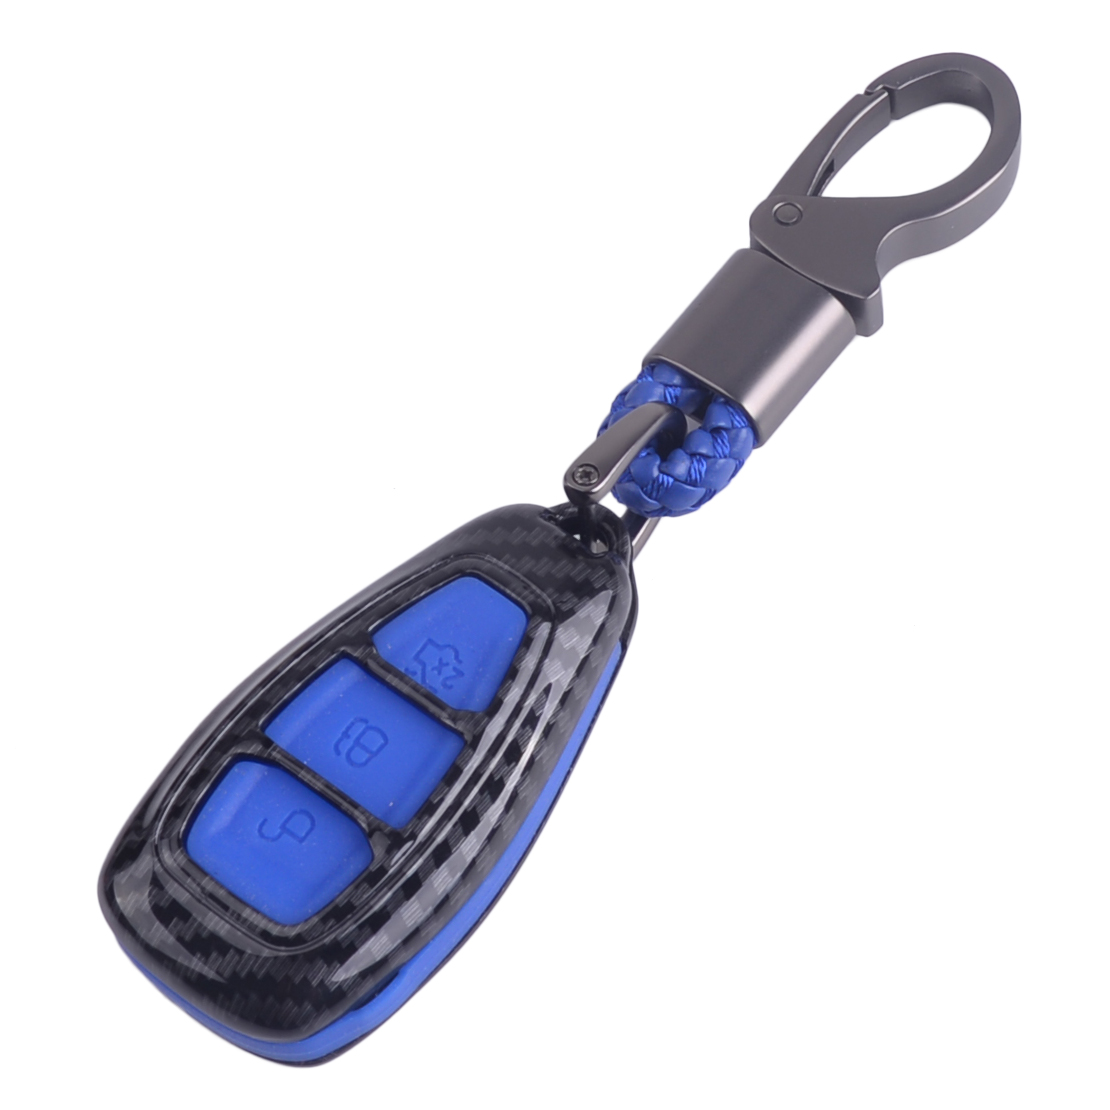 Fit Ford Focus Fiesta Kuga C-Max Galaxy Carbon Fiber Remote Key Case Cover Shell 